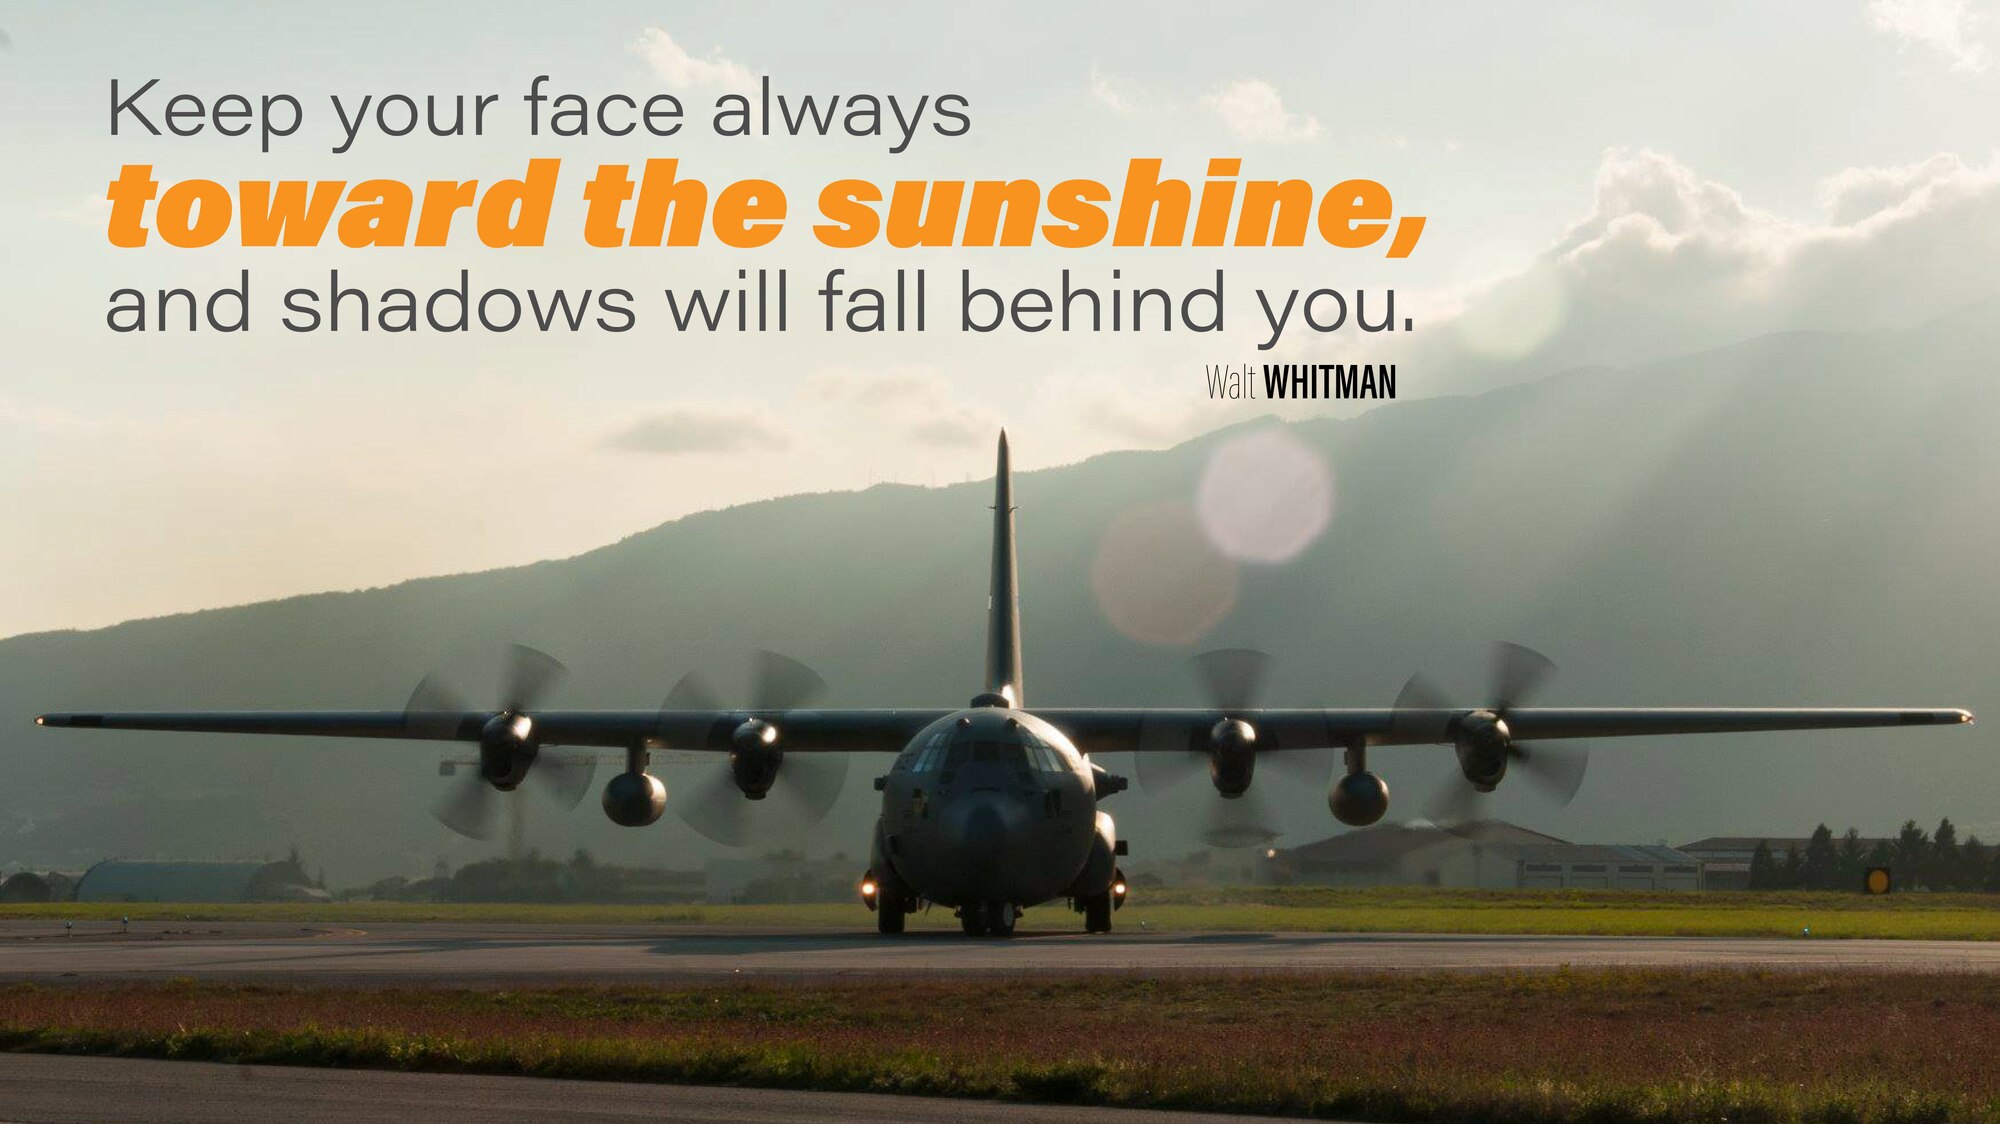 This week's Monday Motivation is from Walt Whitman, an American poet. 

"Keep your face always toward the sunshine, and shadows will fall behind you."

(U.S. Air Force graphic/Tech. Sgt. Andrew Park)